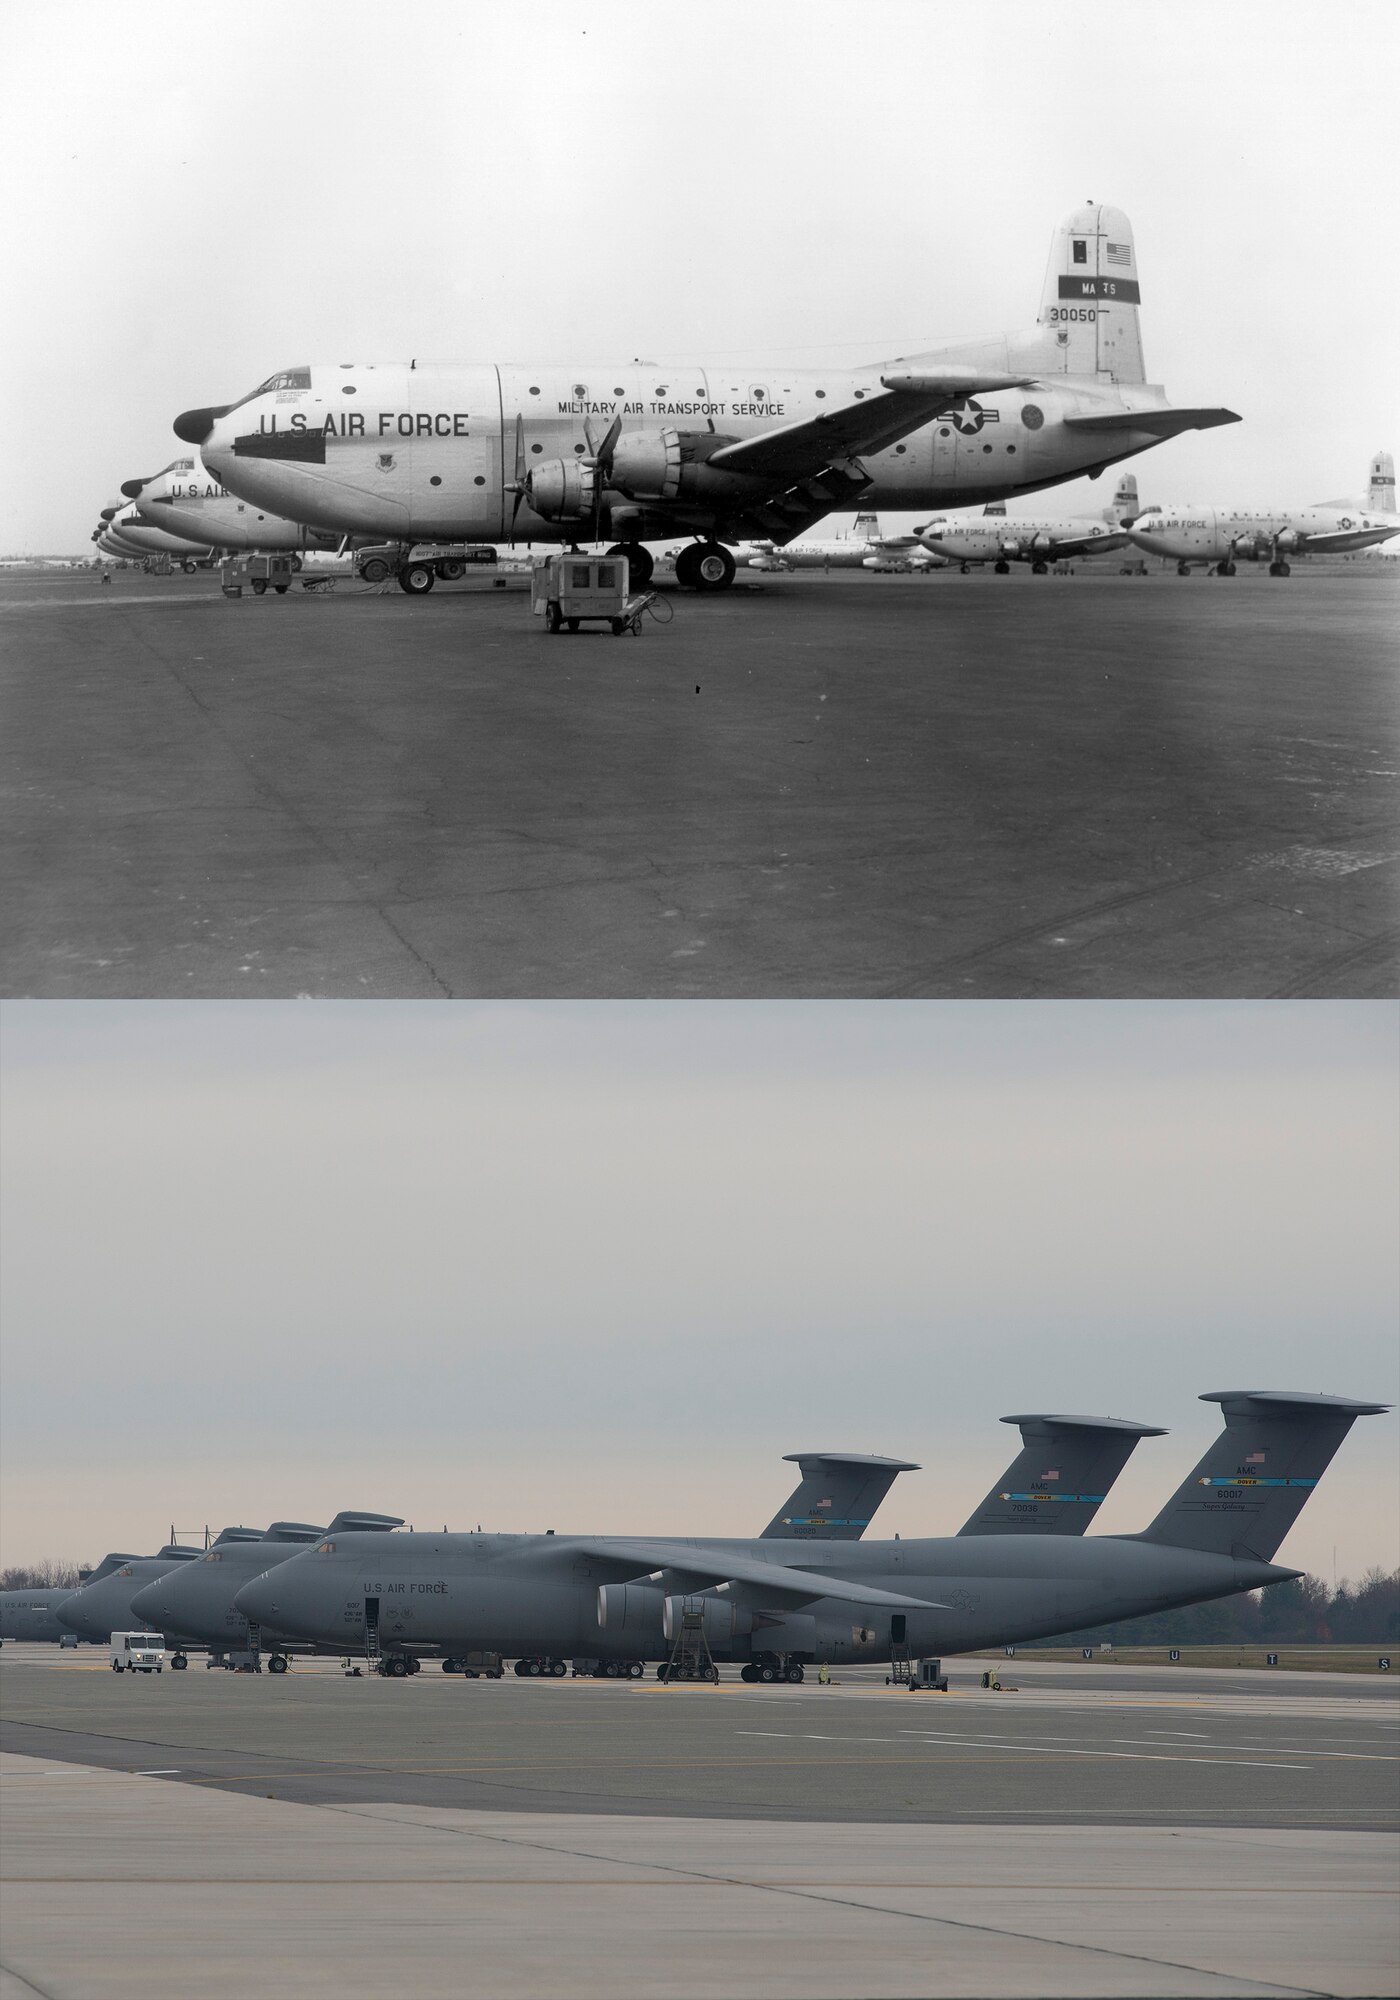 Circa early 1960s versus 2016. C-124 Globemaster II and C-5M Super Galaxy airlifters on the flightline. (U.S. Air Force photo illustration by Senior Airman Zachary Cacicia)